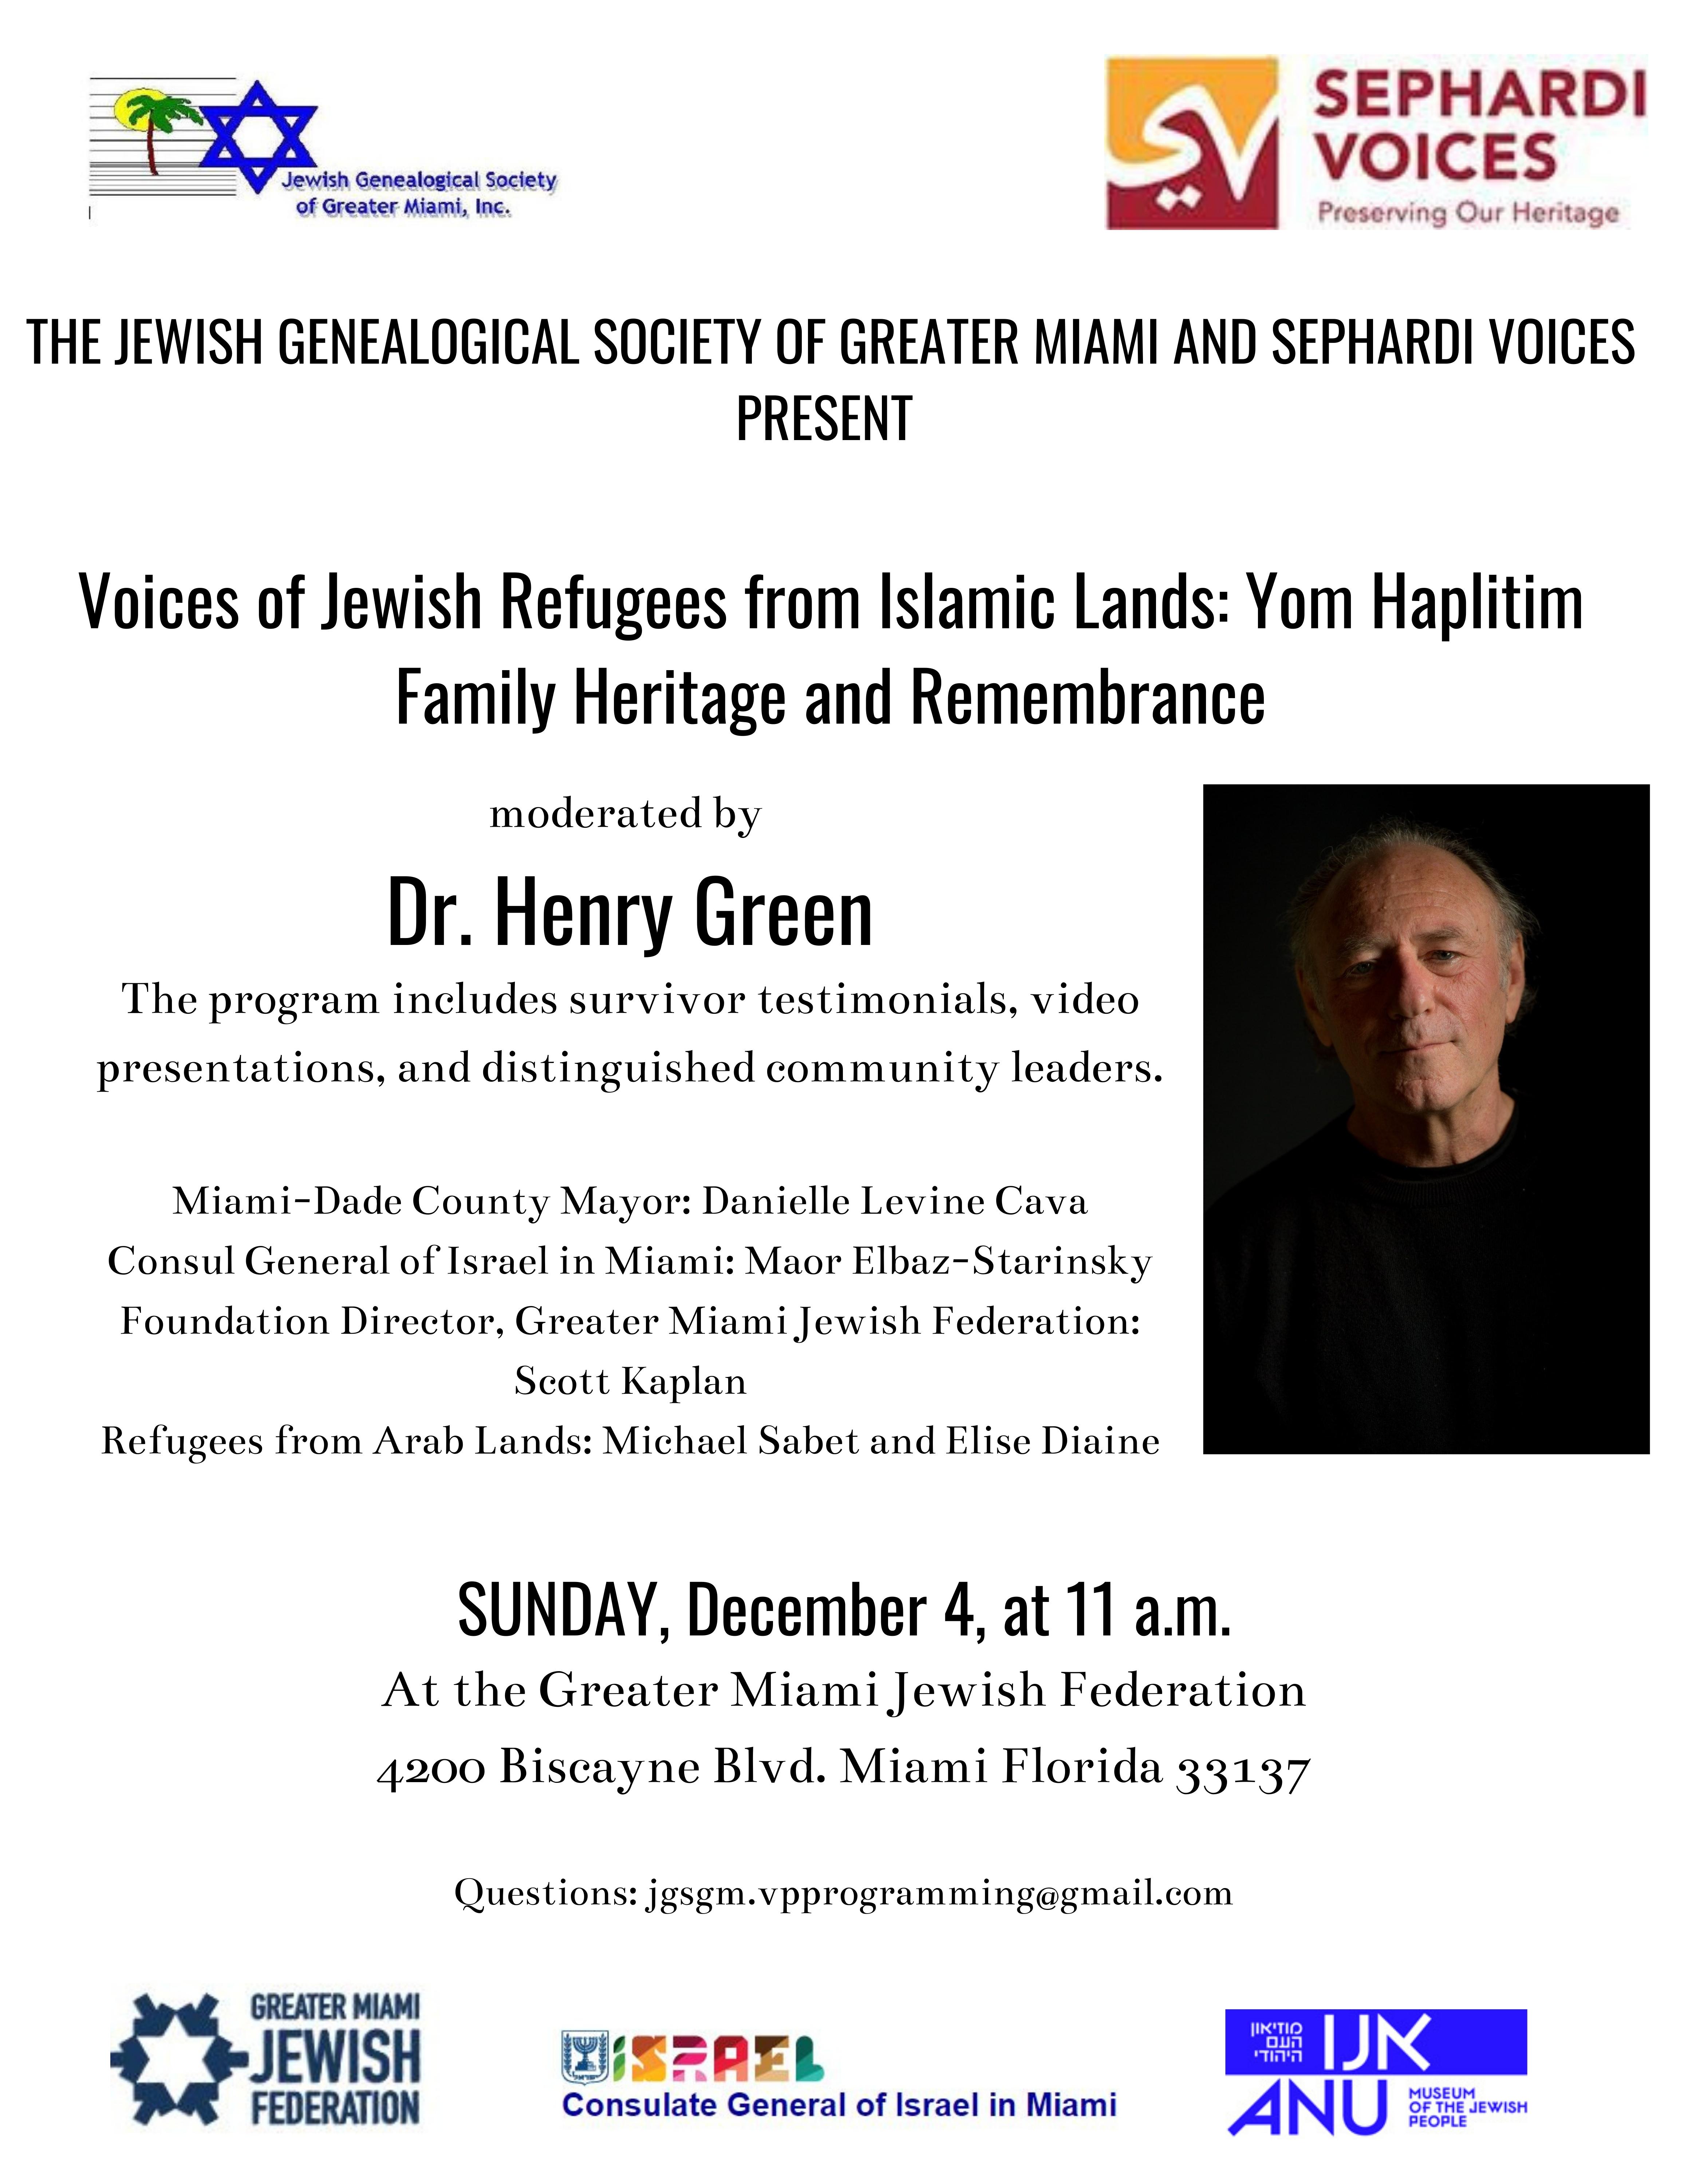 Voices of Jewish Refugees